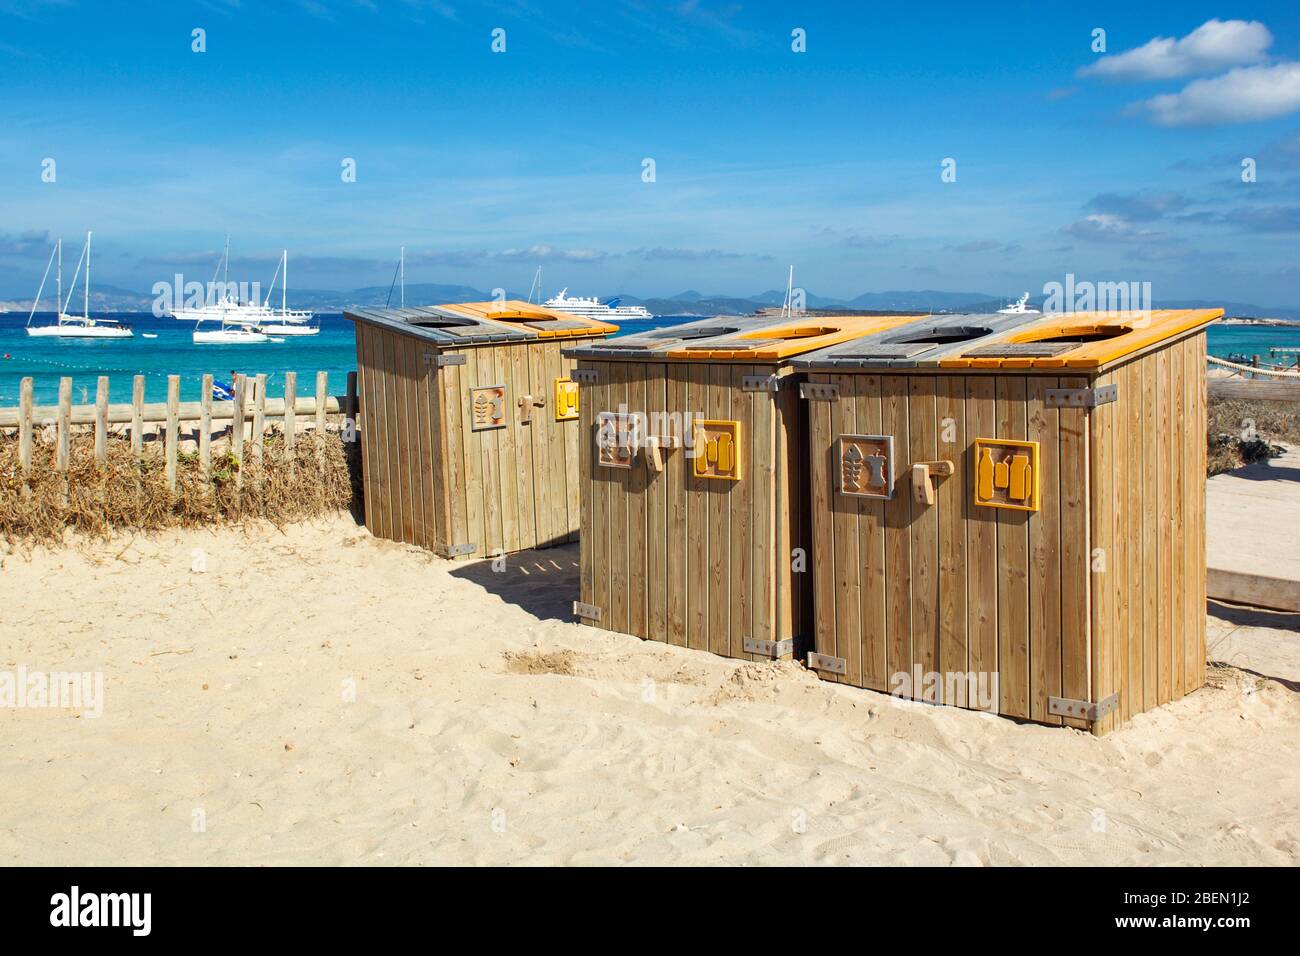 Ses Illetes Beach, Formentera, Balearic Island, Spain. Ecological wooden rubbish bins for separate collection on the beach parking lot. Stock Photo